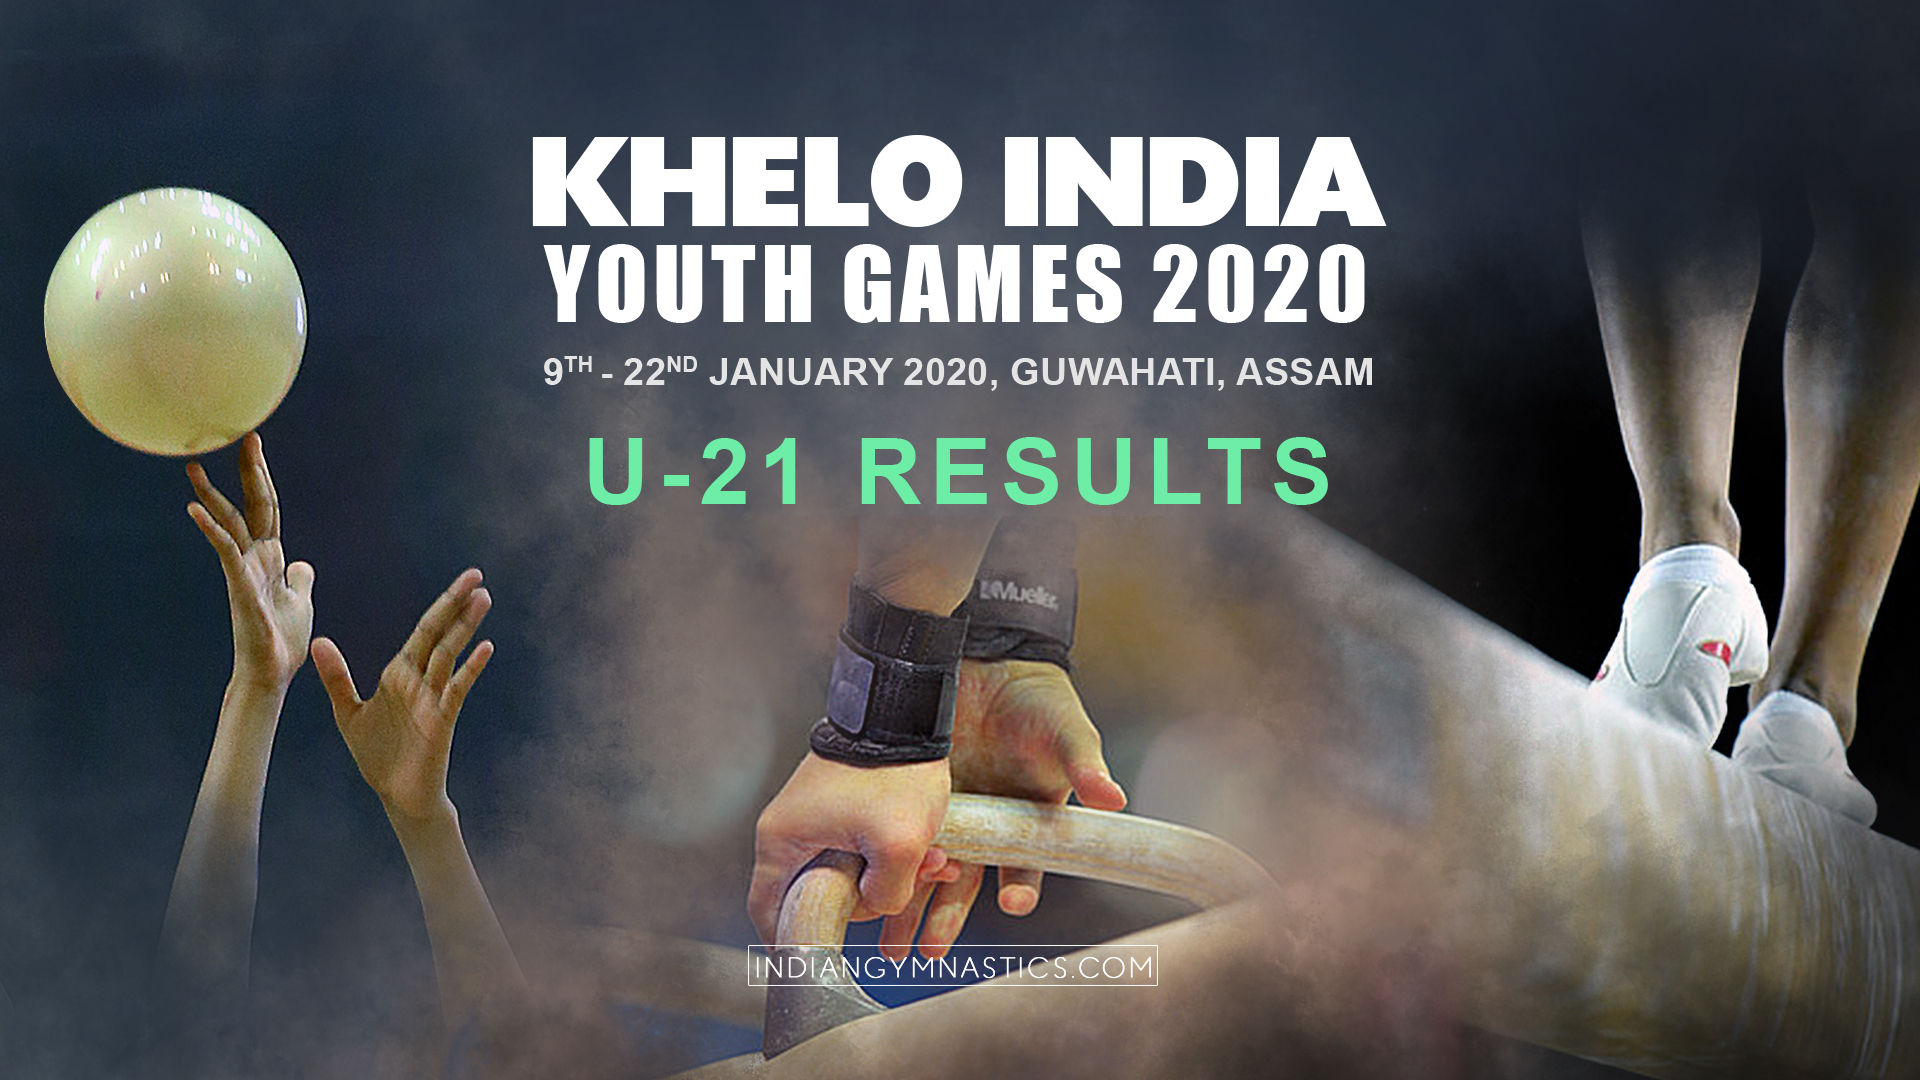 Khelo India Youth Games 2020 | Under 21 Results